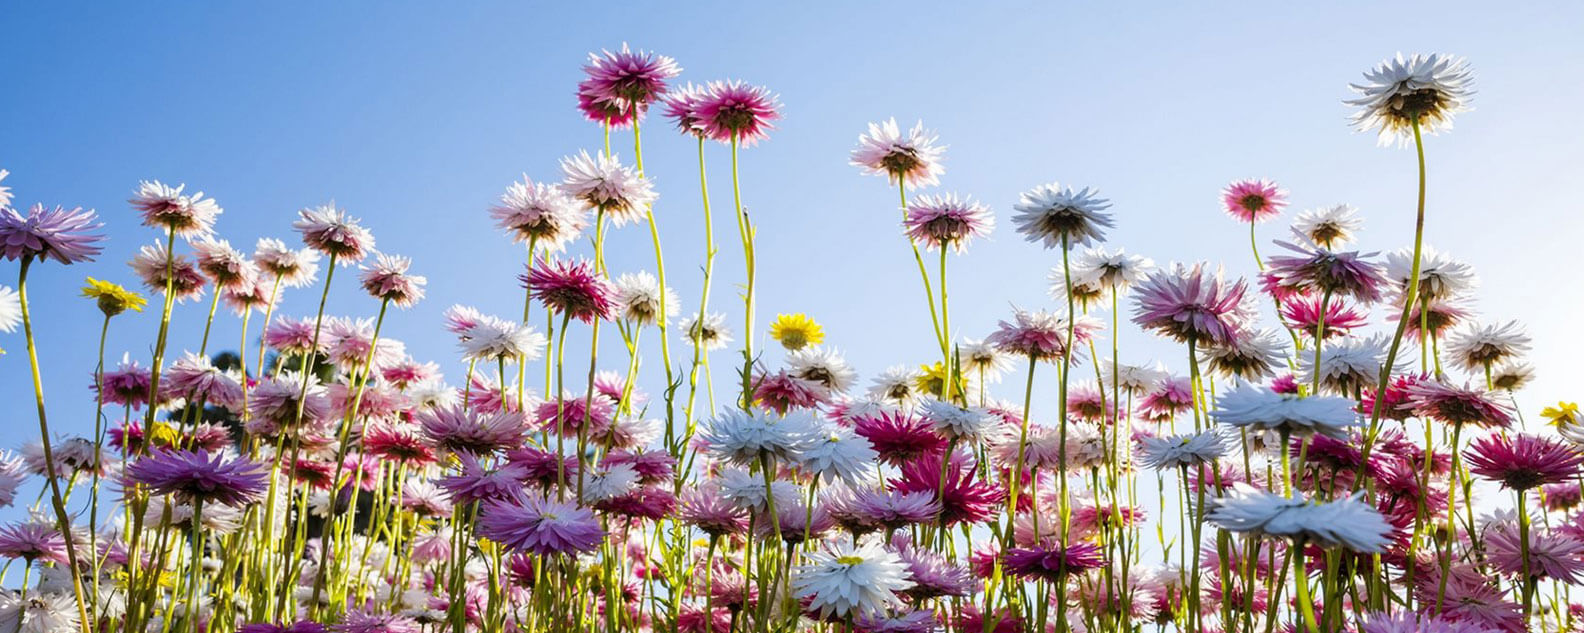 Pink, white and yellow paper daisies against a pale blue sky